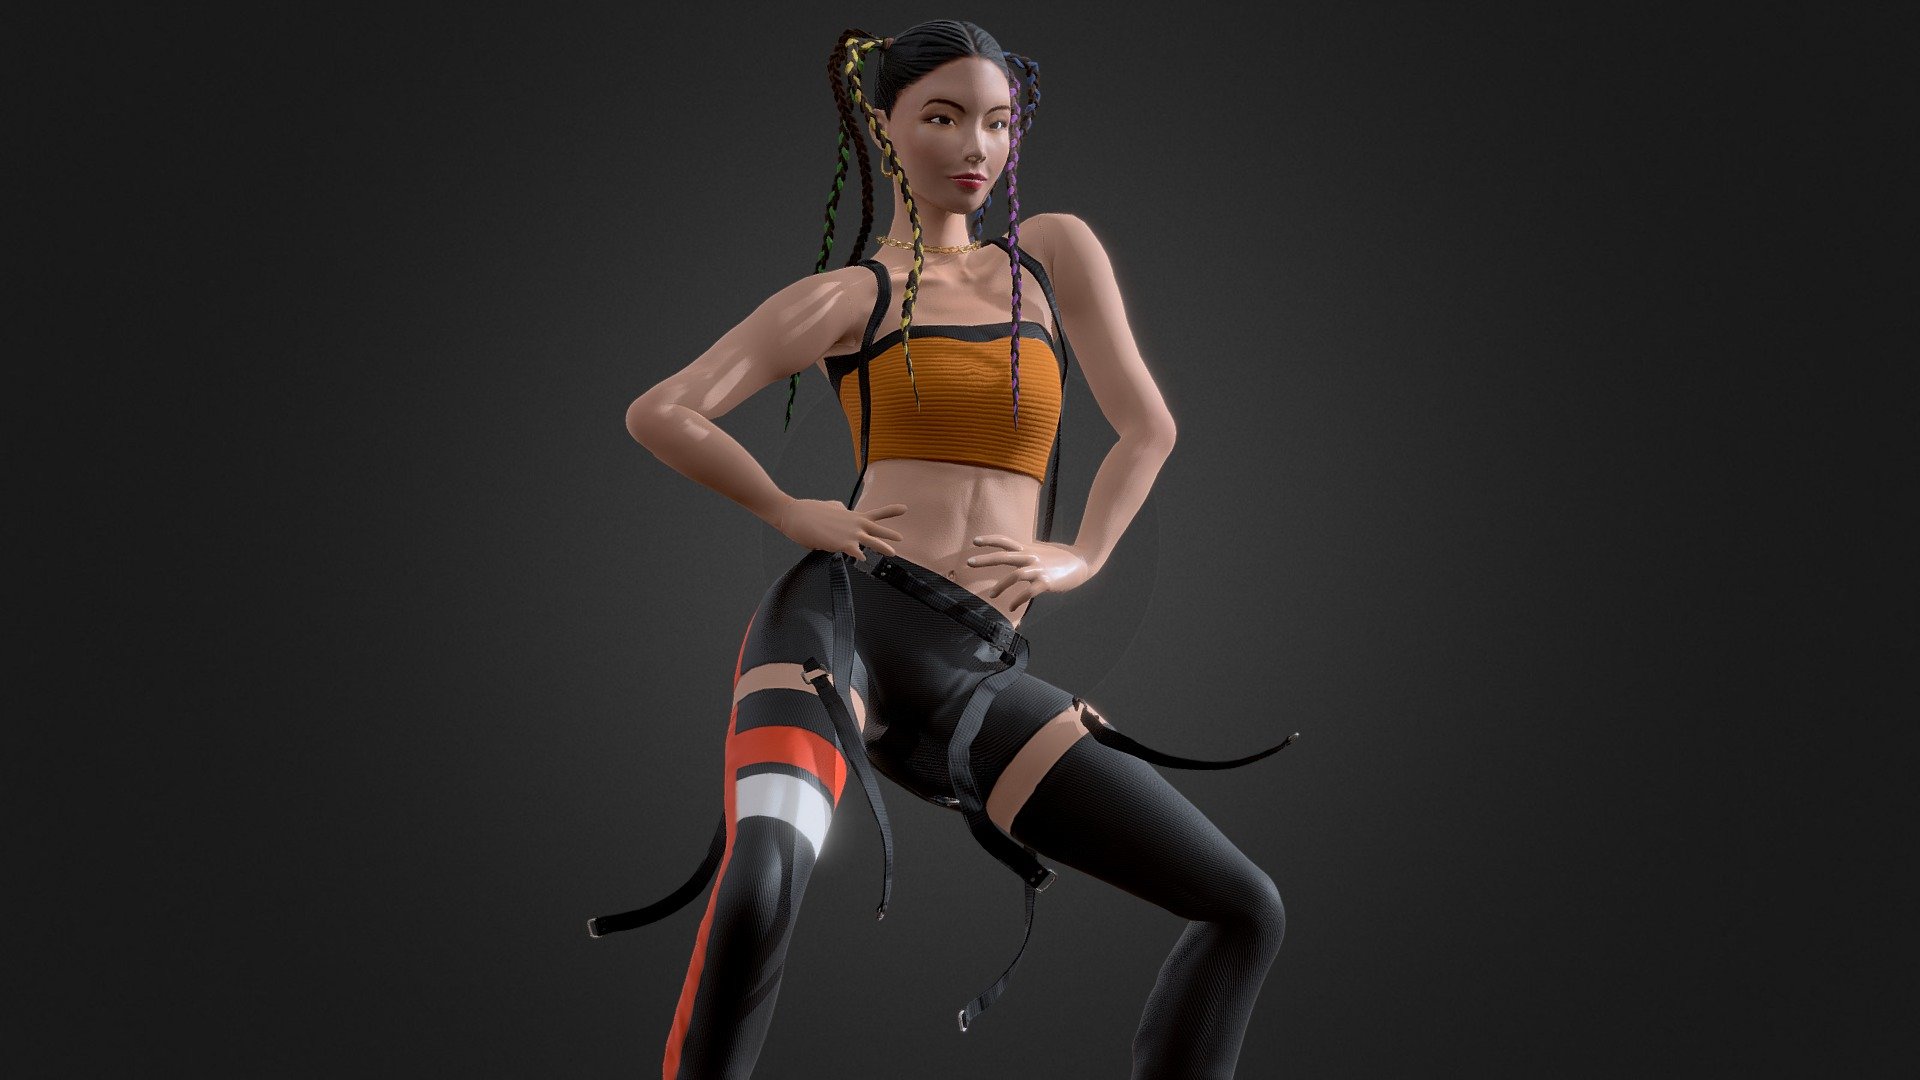 This is  a Fan art that I made for myself, is a likeness model of the singer and dancer korean Yuji from the korean Group Itzy with the clothes from the music video Icy - Itzy. I maded too the animation just for fun and practice the animations basics 3d model